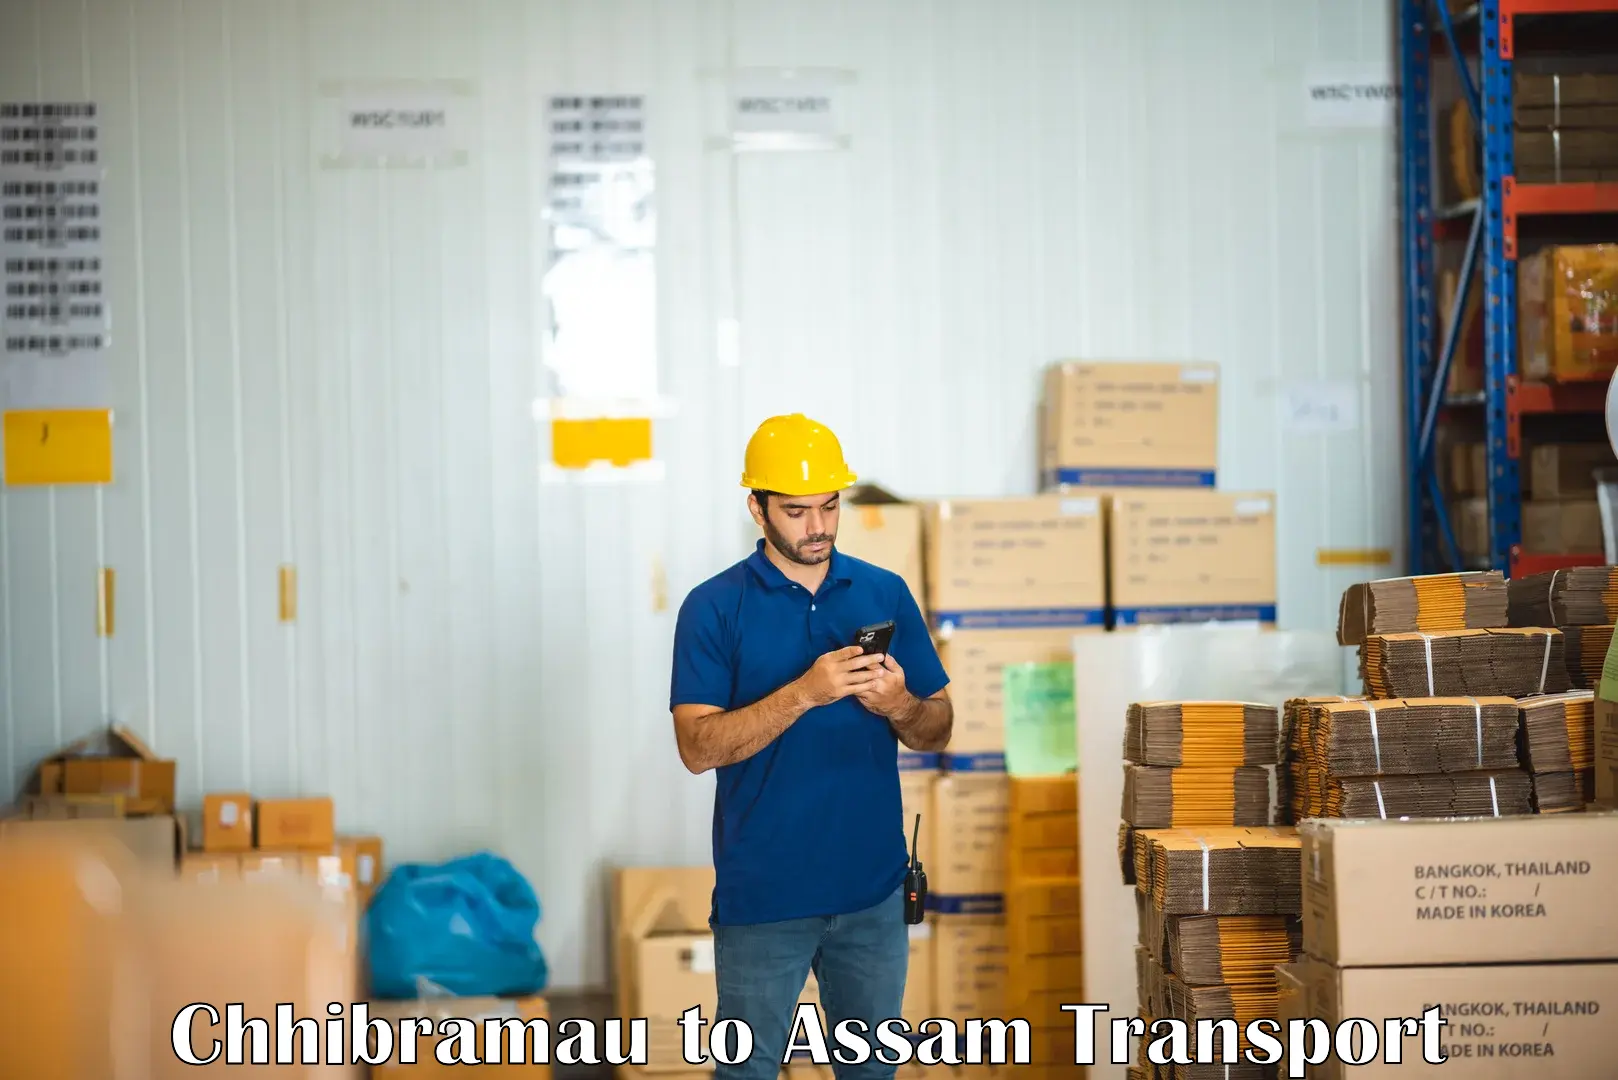 Container transport service Chhibramau to Lala Assam